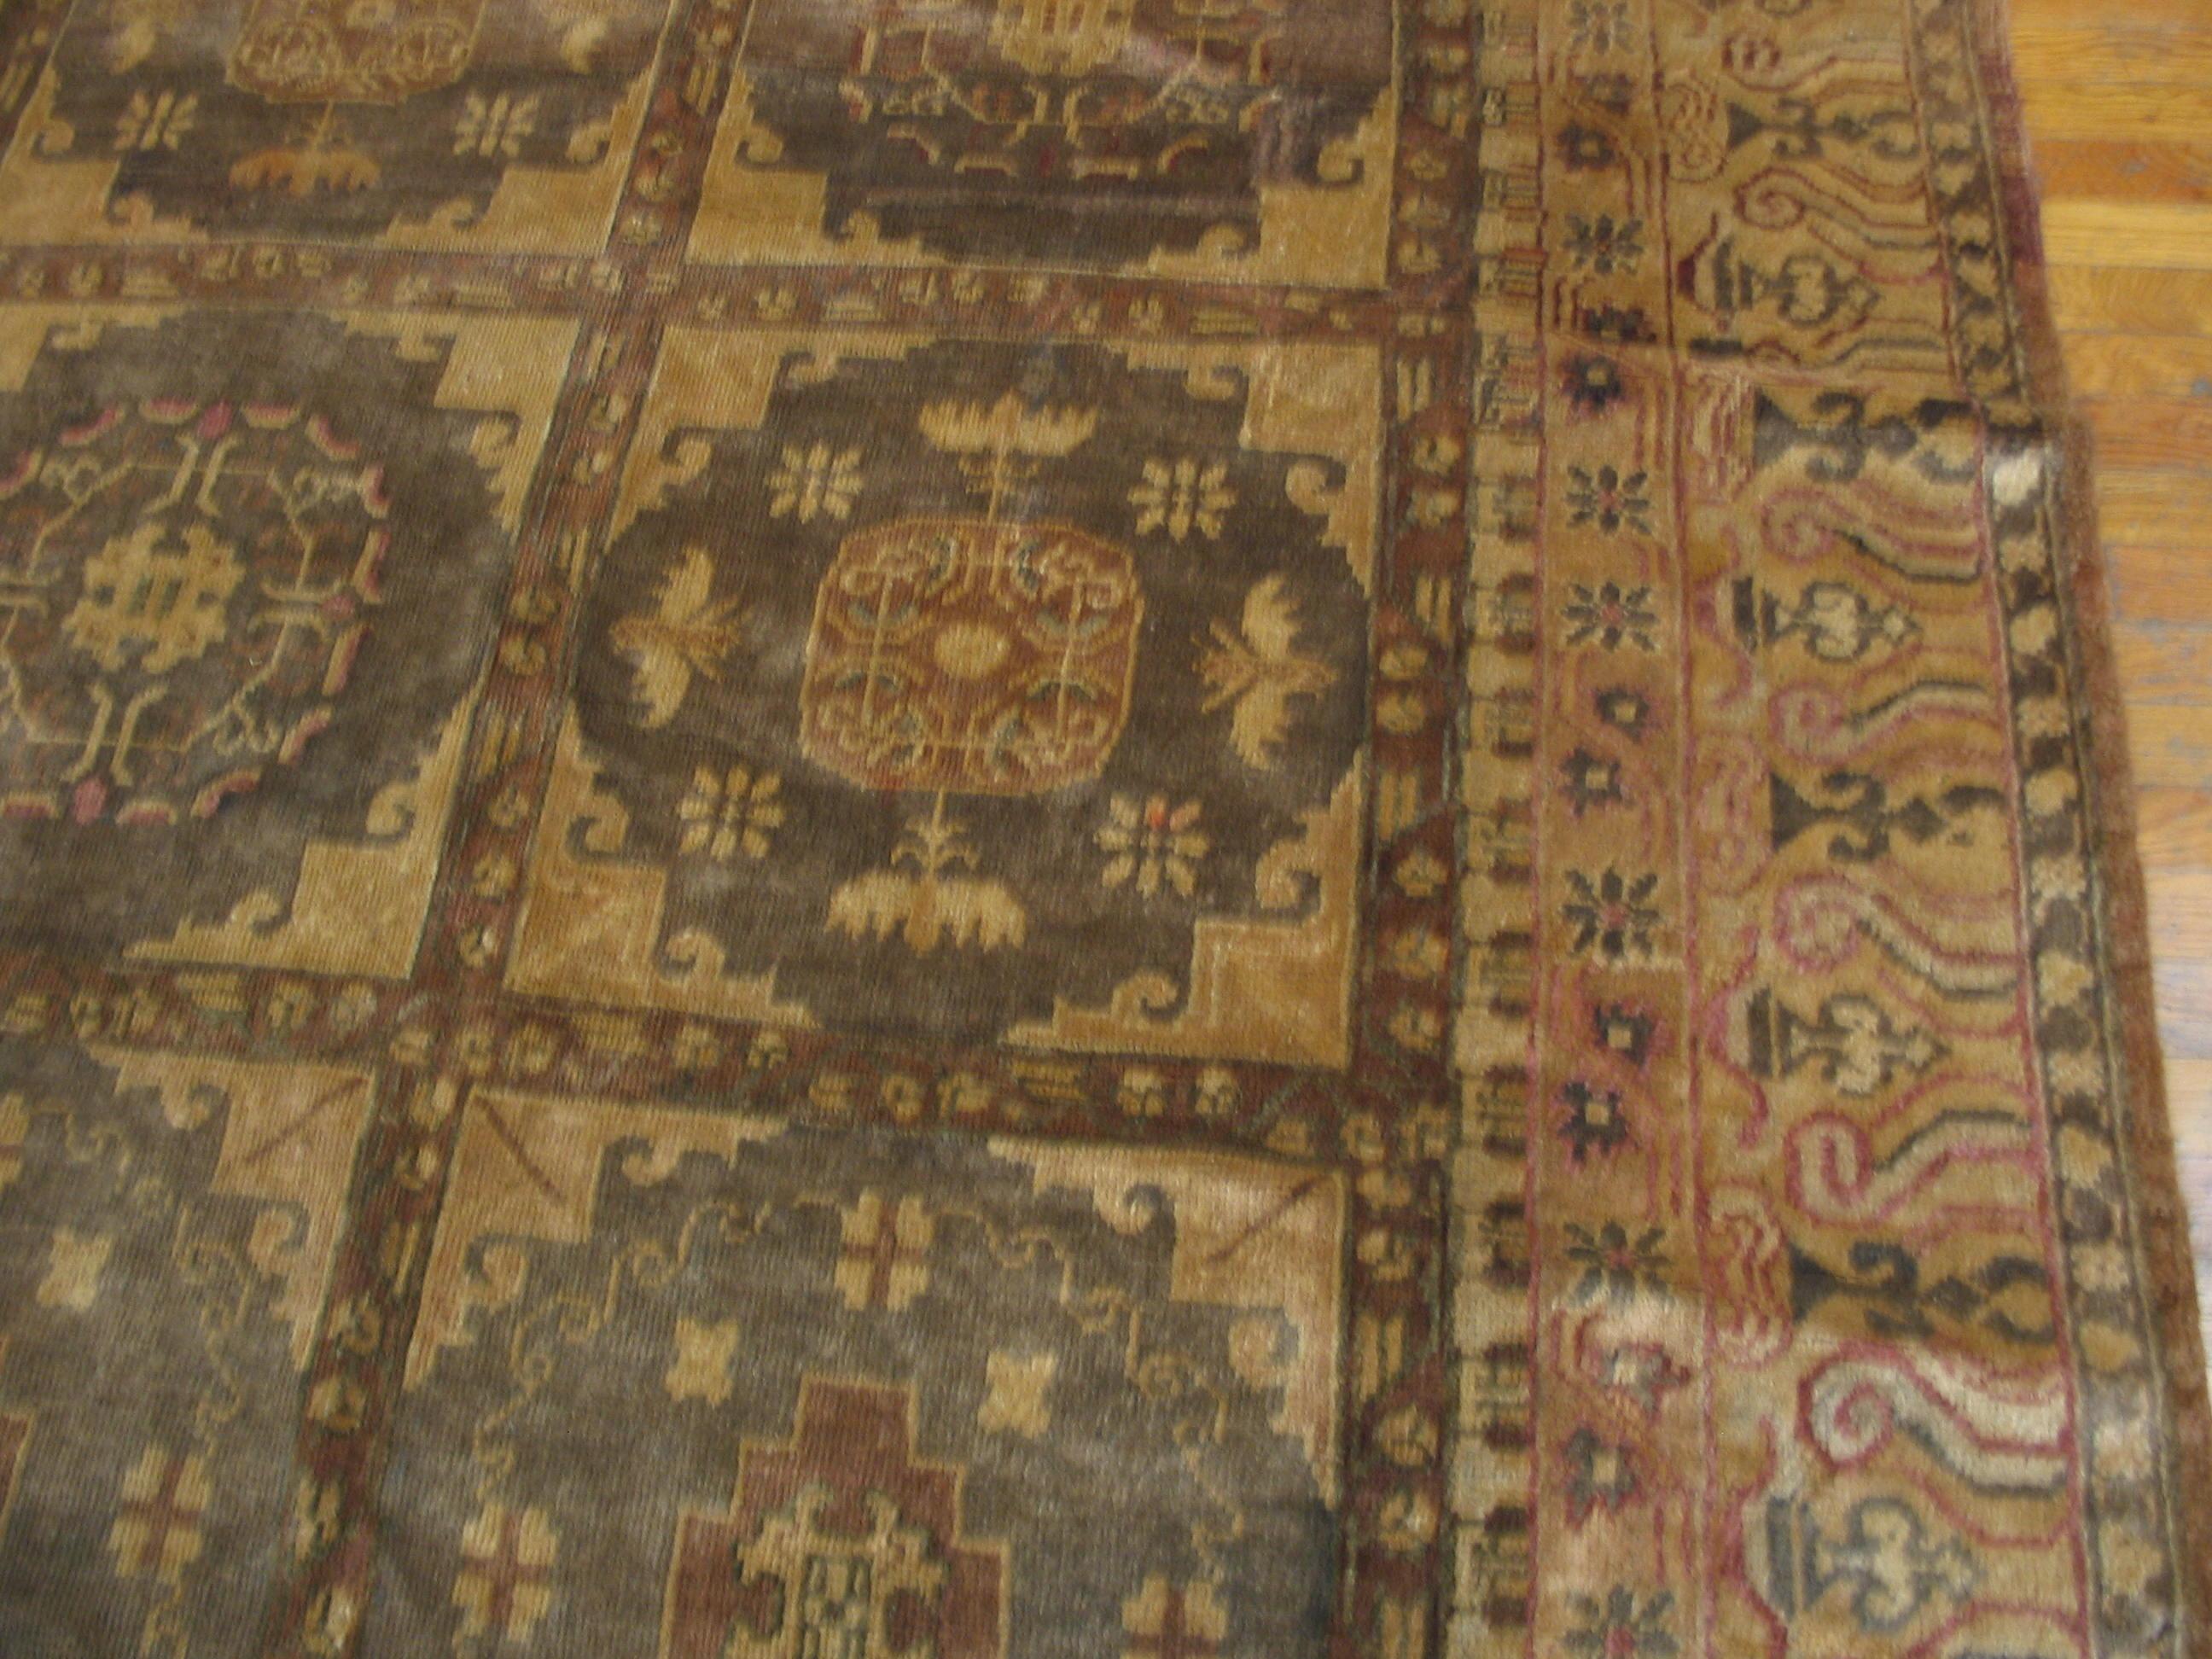 Hand-Knotted Early 20th Century Central Asian Chinese Khotan Carpet (6'3